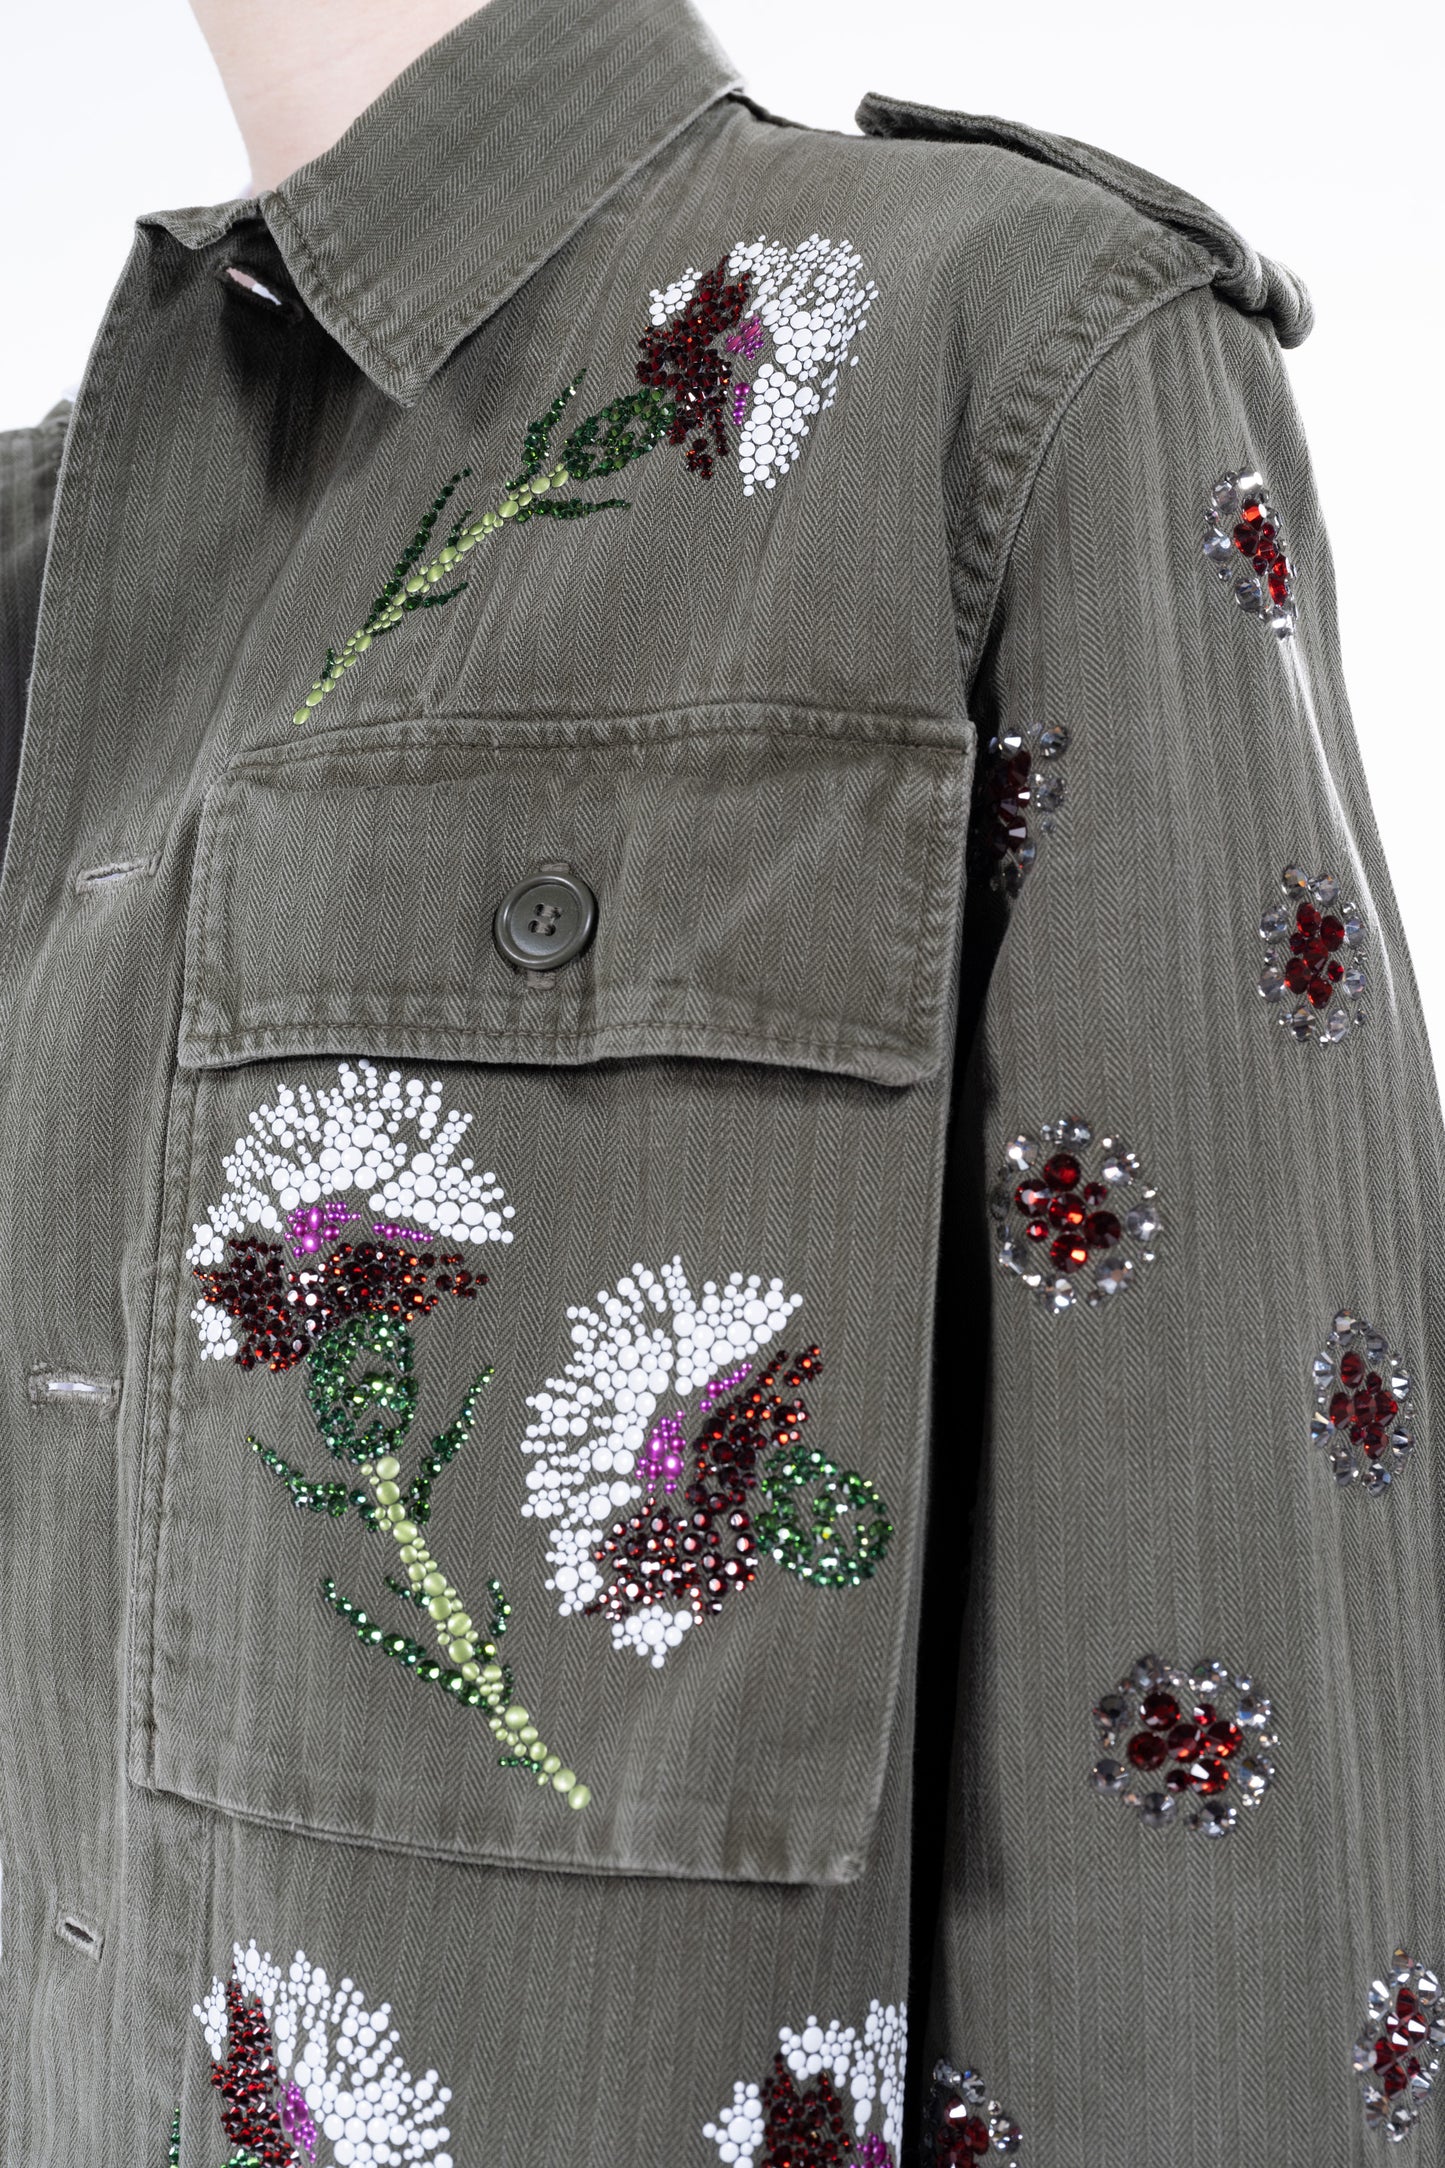 'OTTOMAN CARNATION AND VICTORIAN PINS' VINTAGE FRENCH MILITARY JACKET -  - Libertine